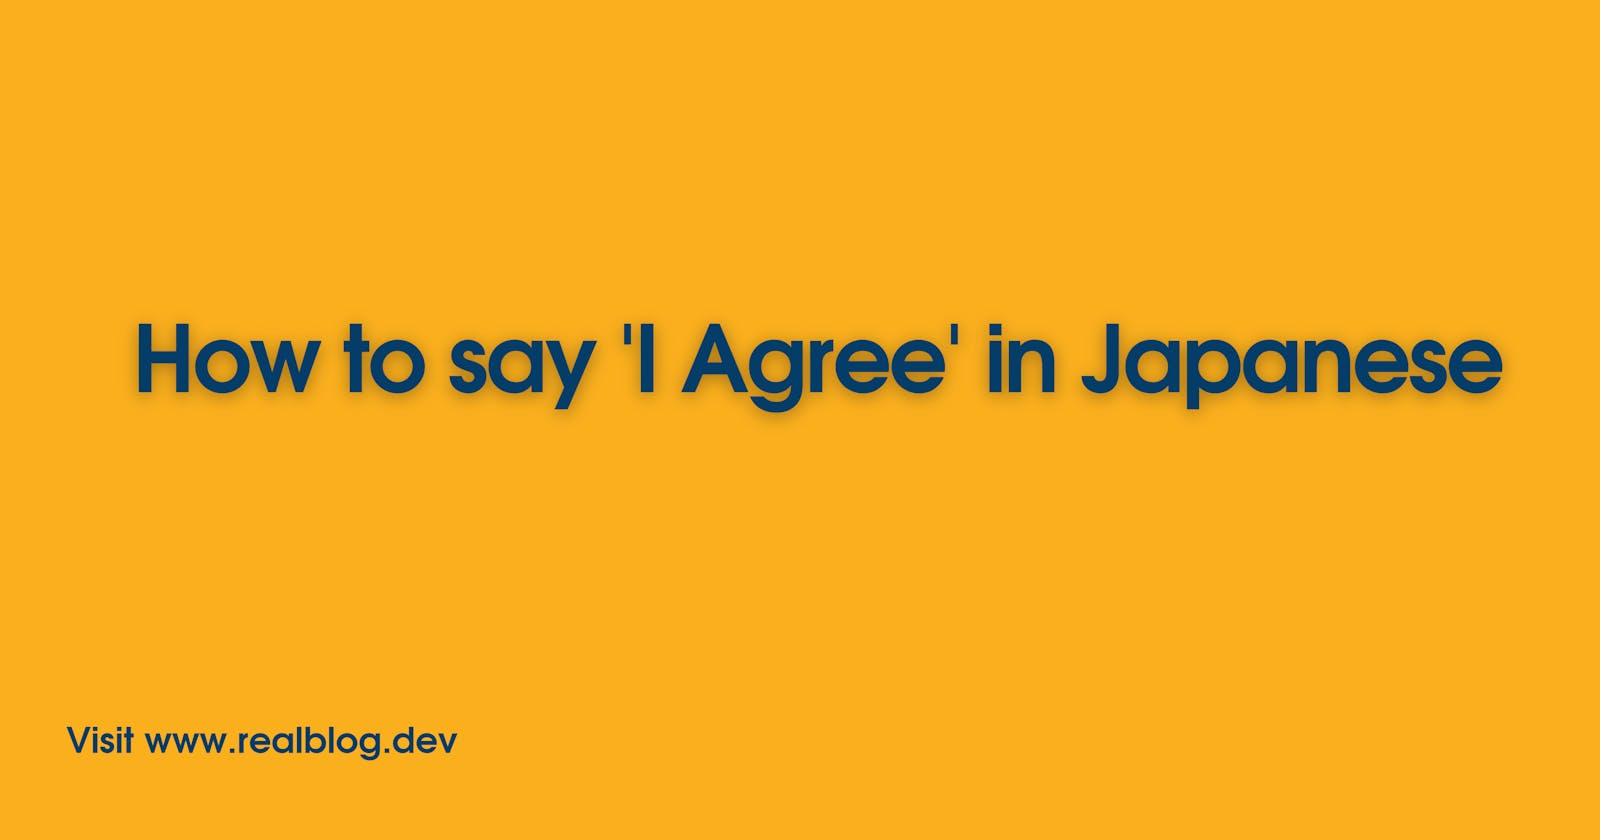 How to Say 'I Agree' In Japanese.